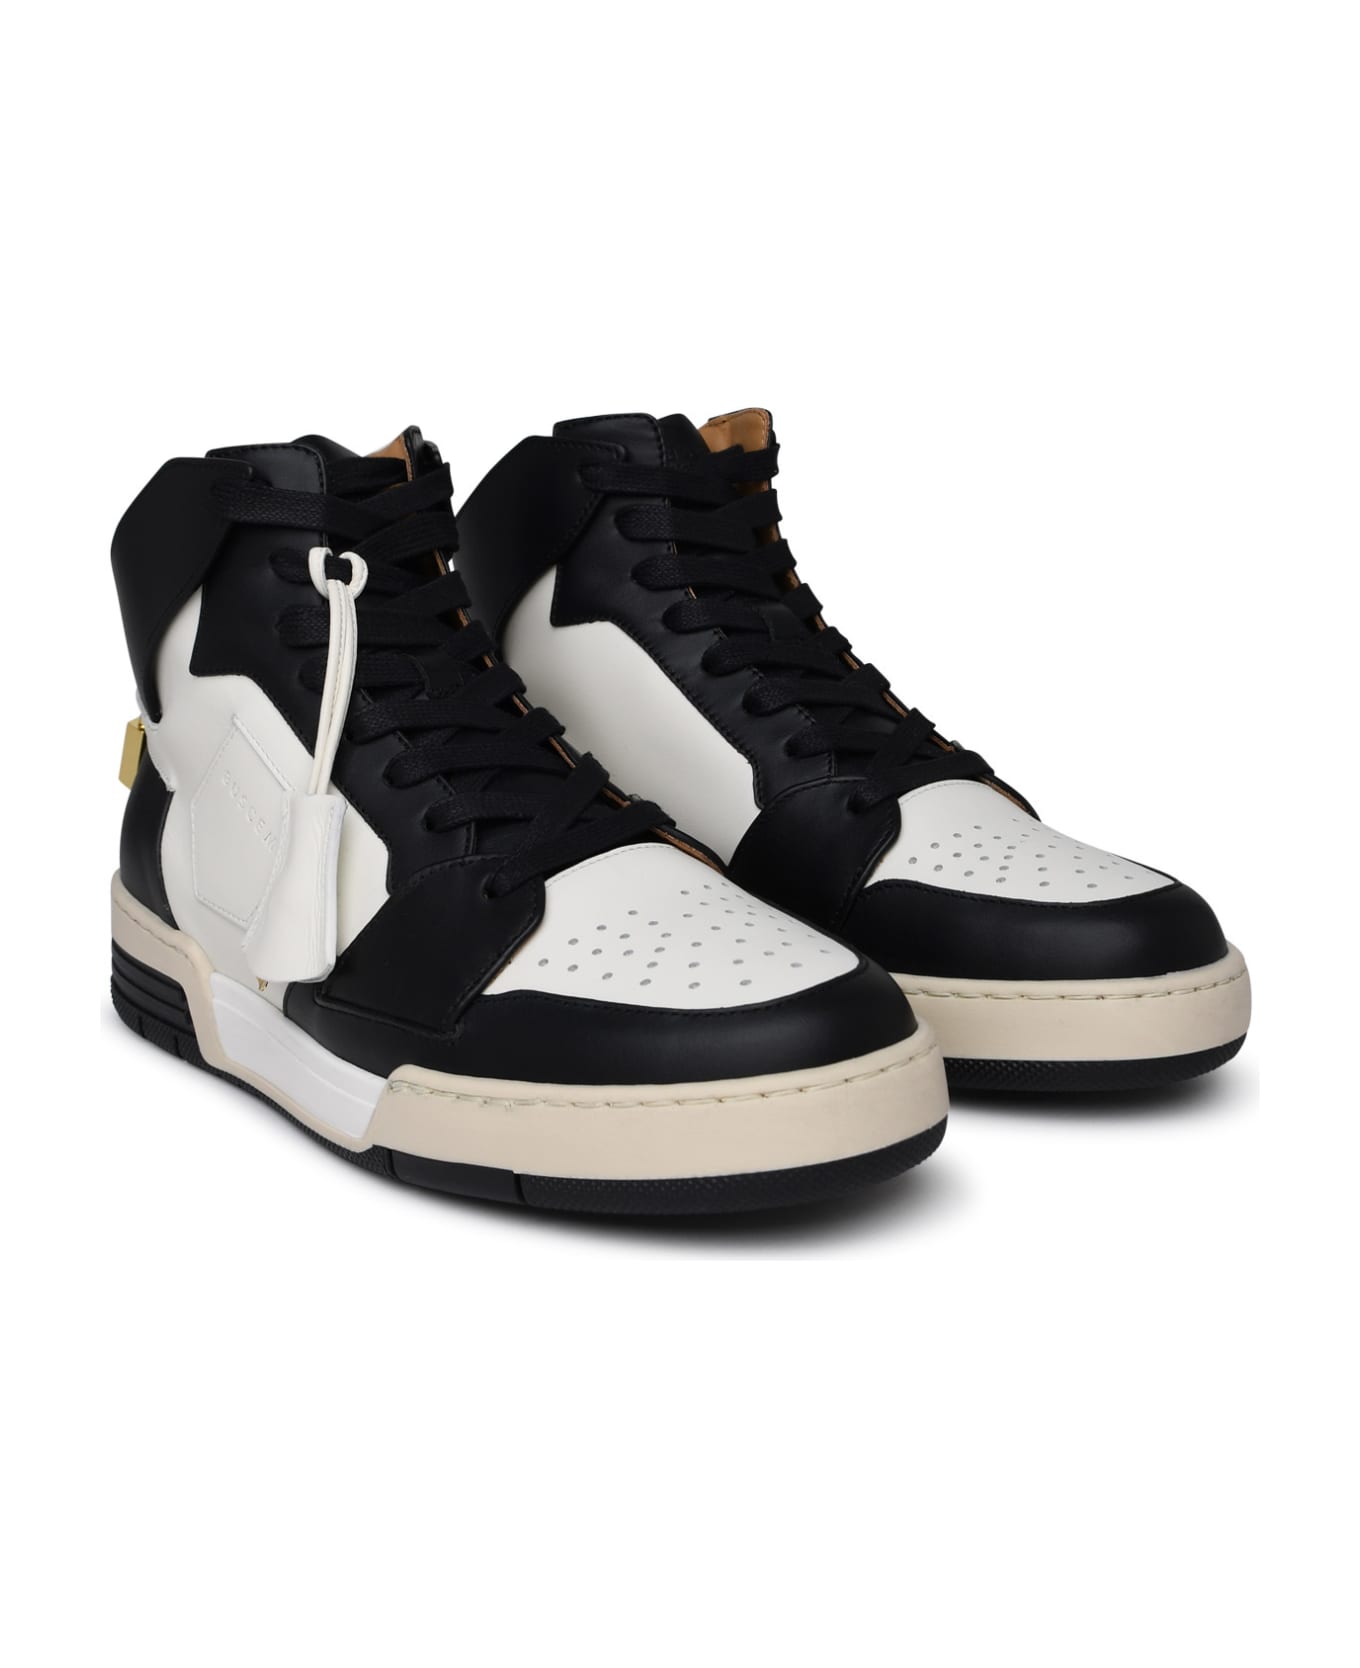 Buscemi 'air Jon' Black And White Leather Sneakers - White